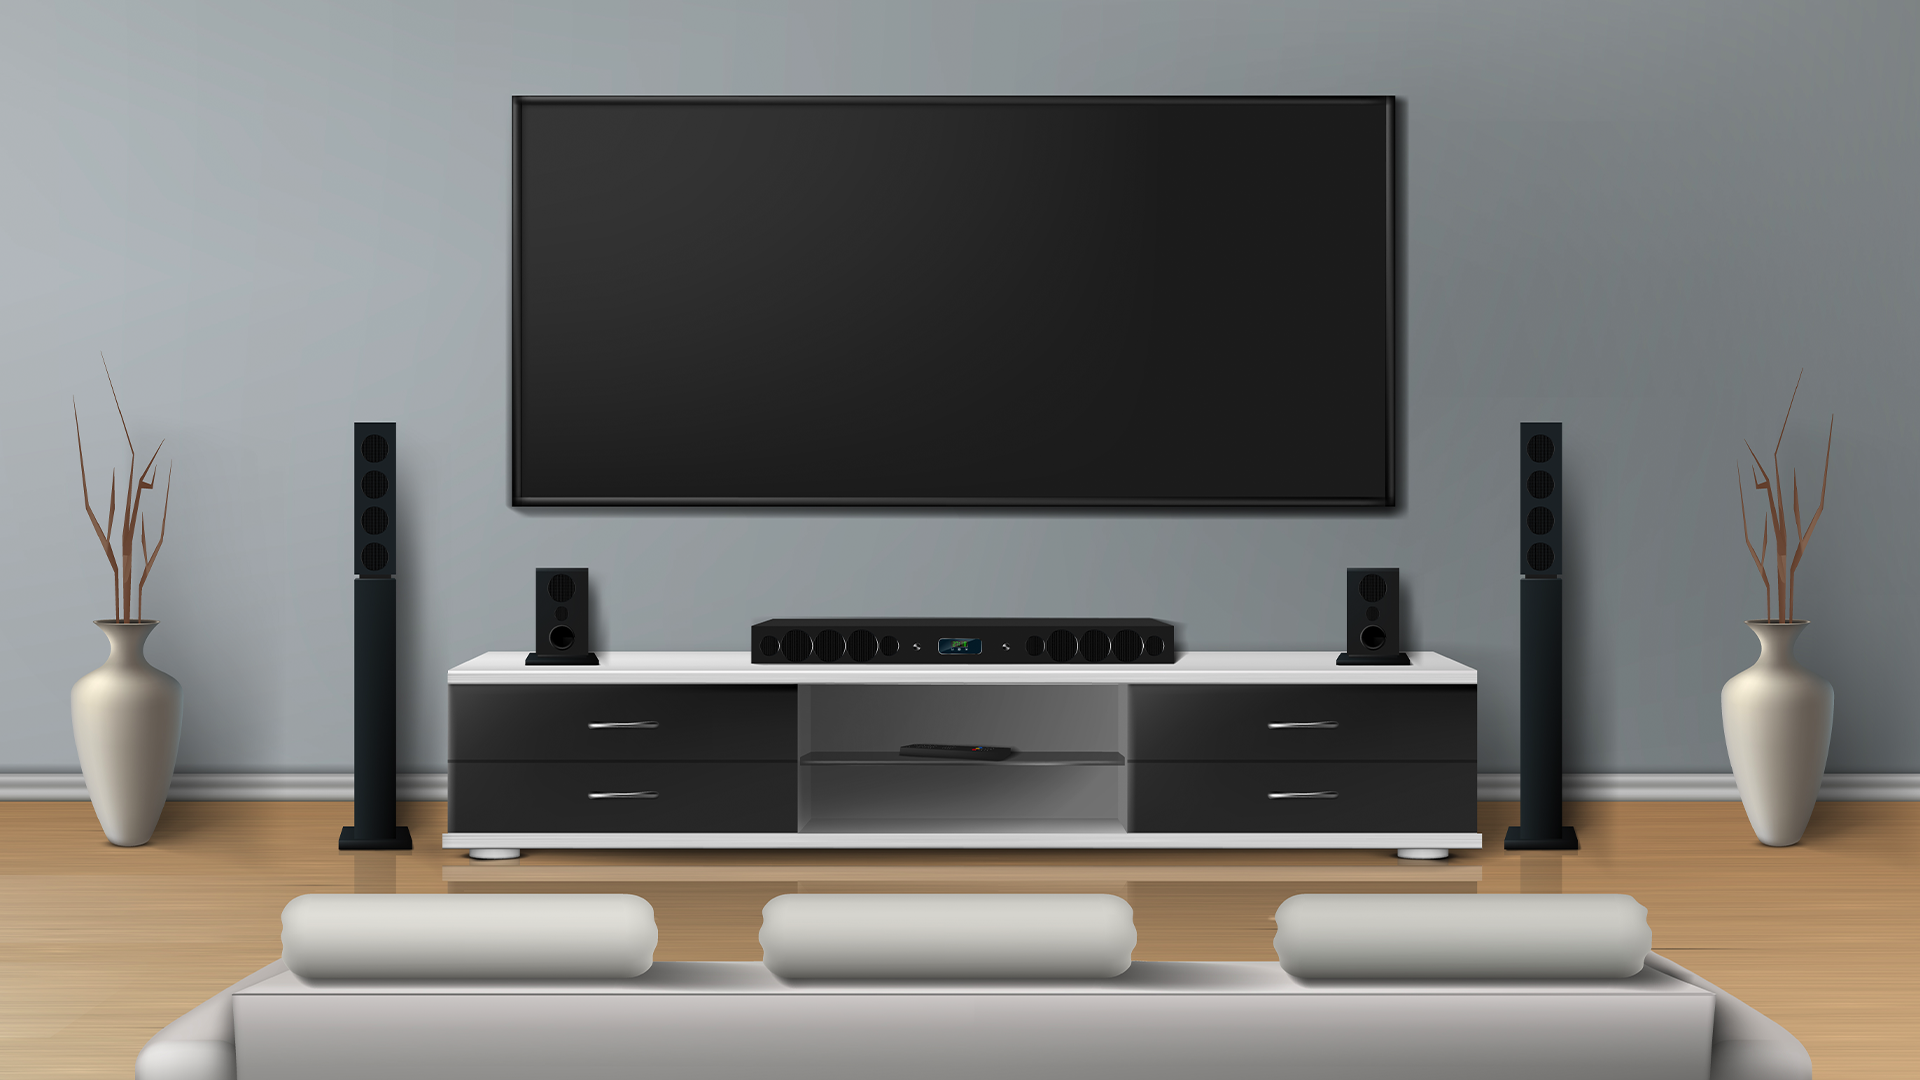 An illustration of a home theater